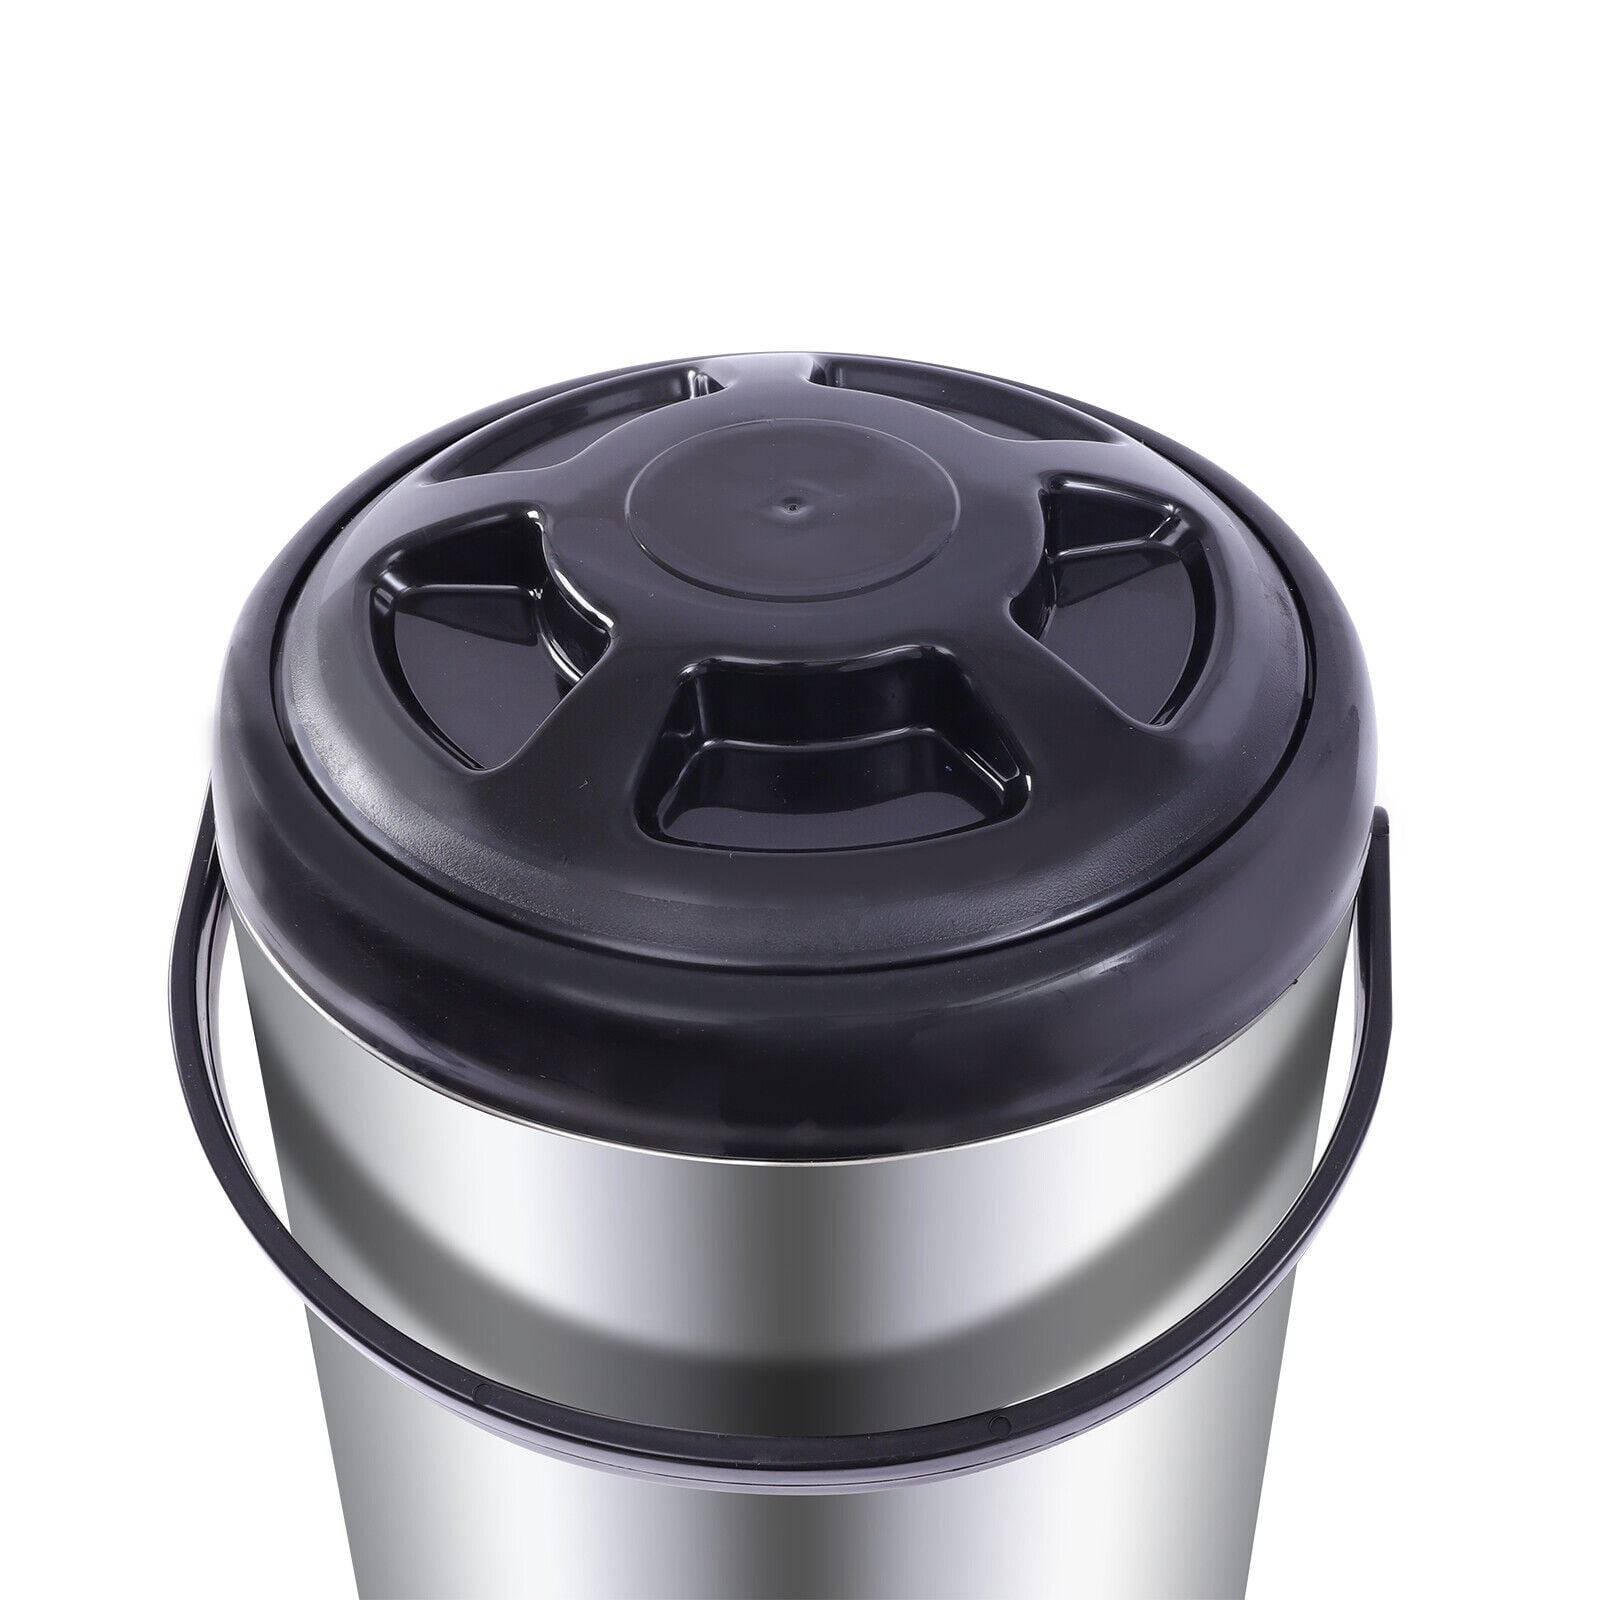 WWP Travel Beverage Container for Hot and Cold Drinks